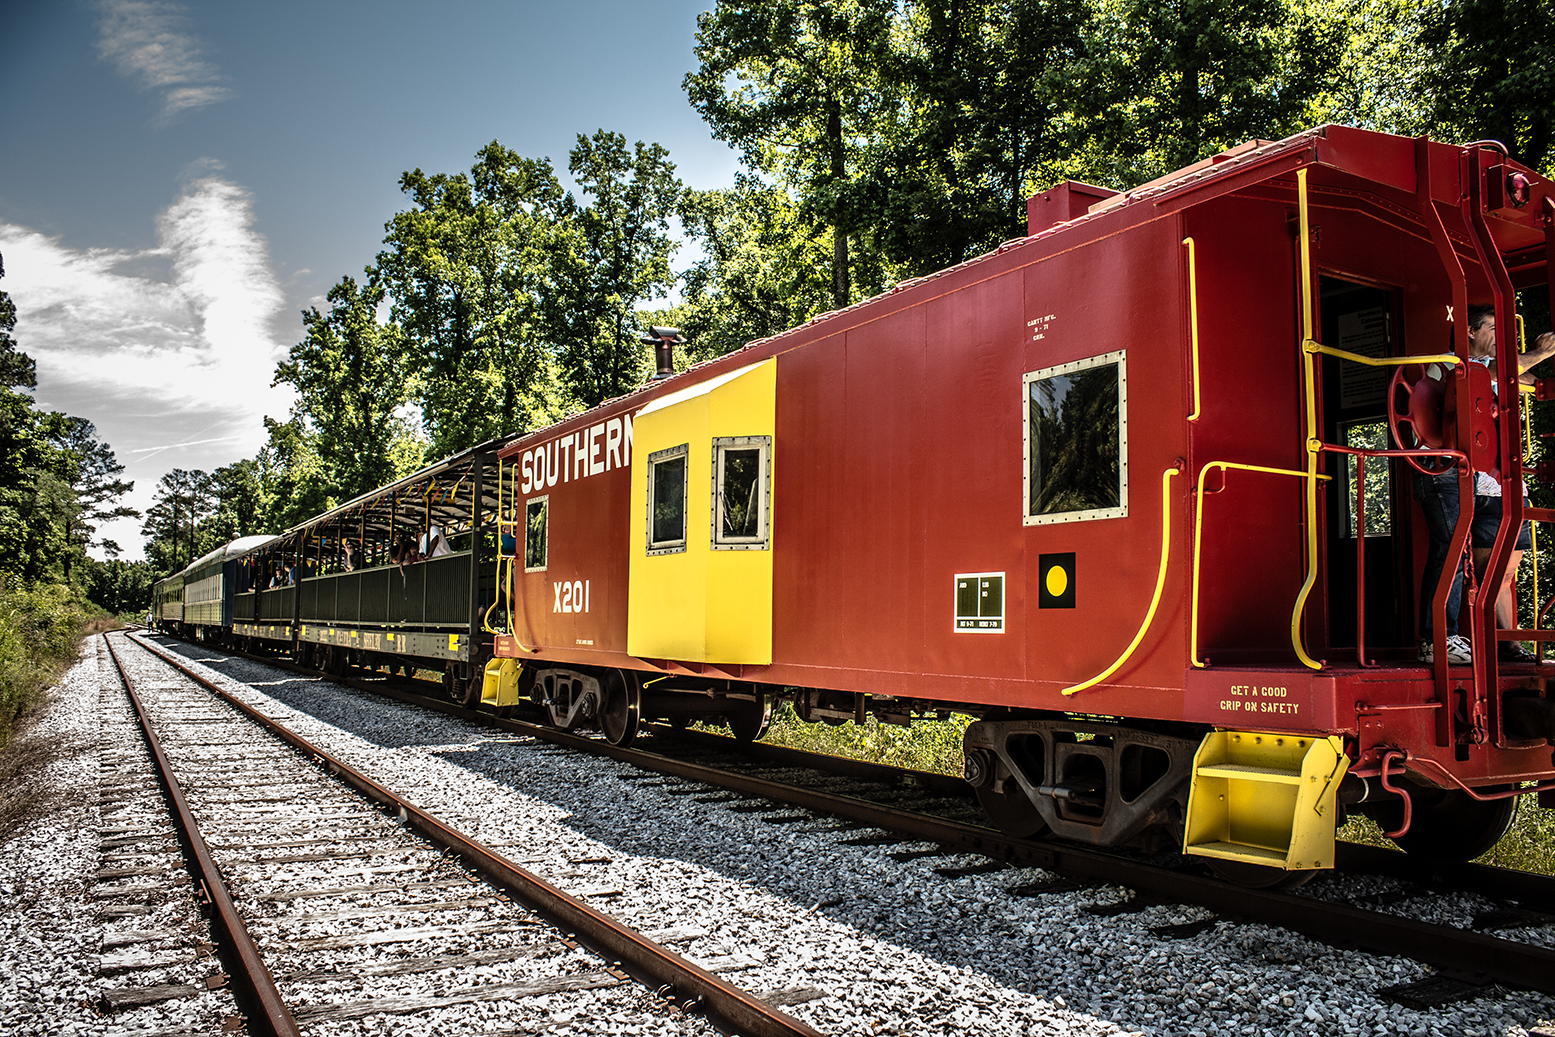 The Heart of Dixie Railroad